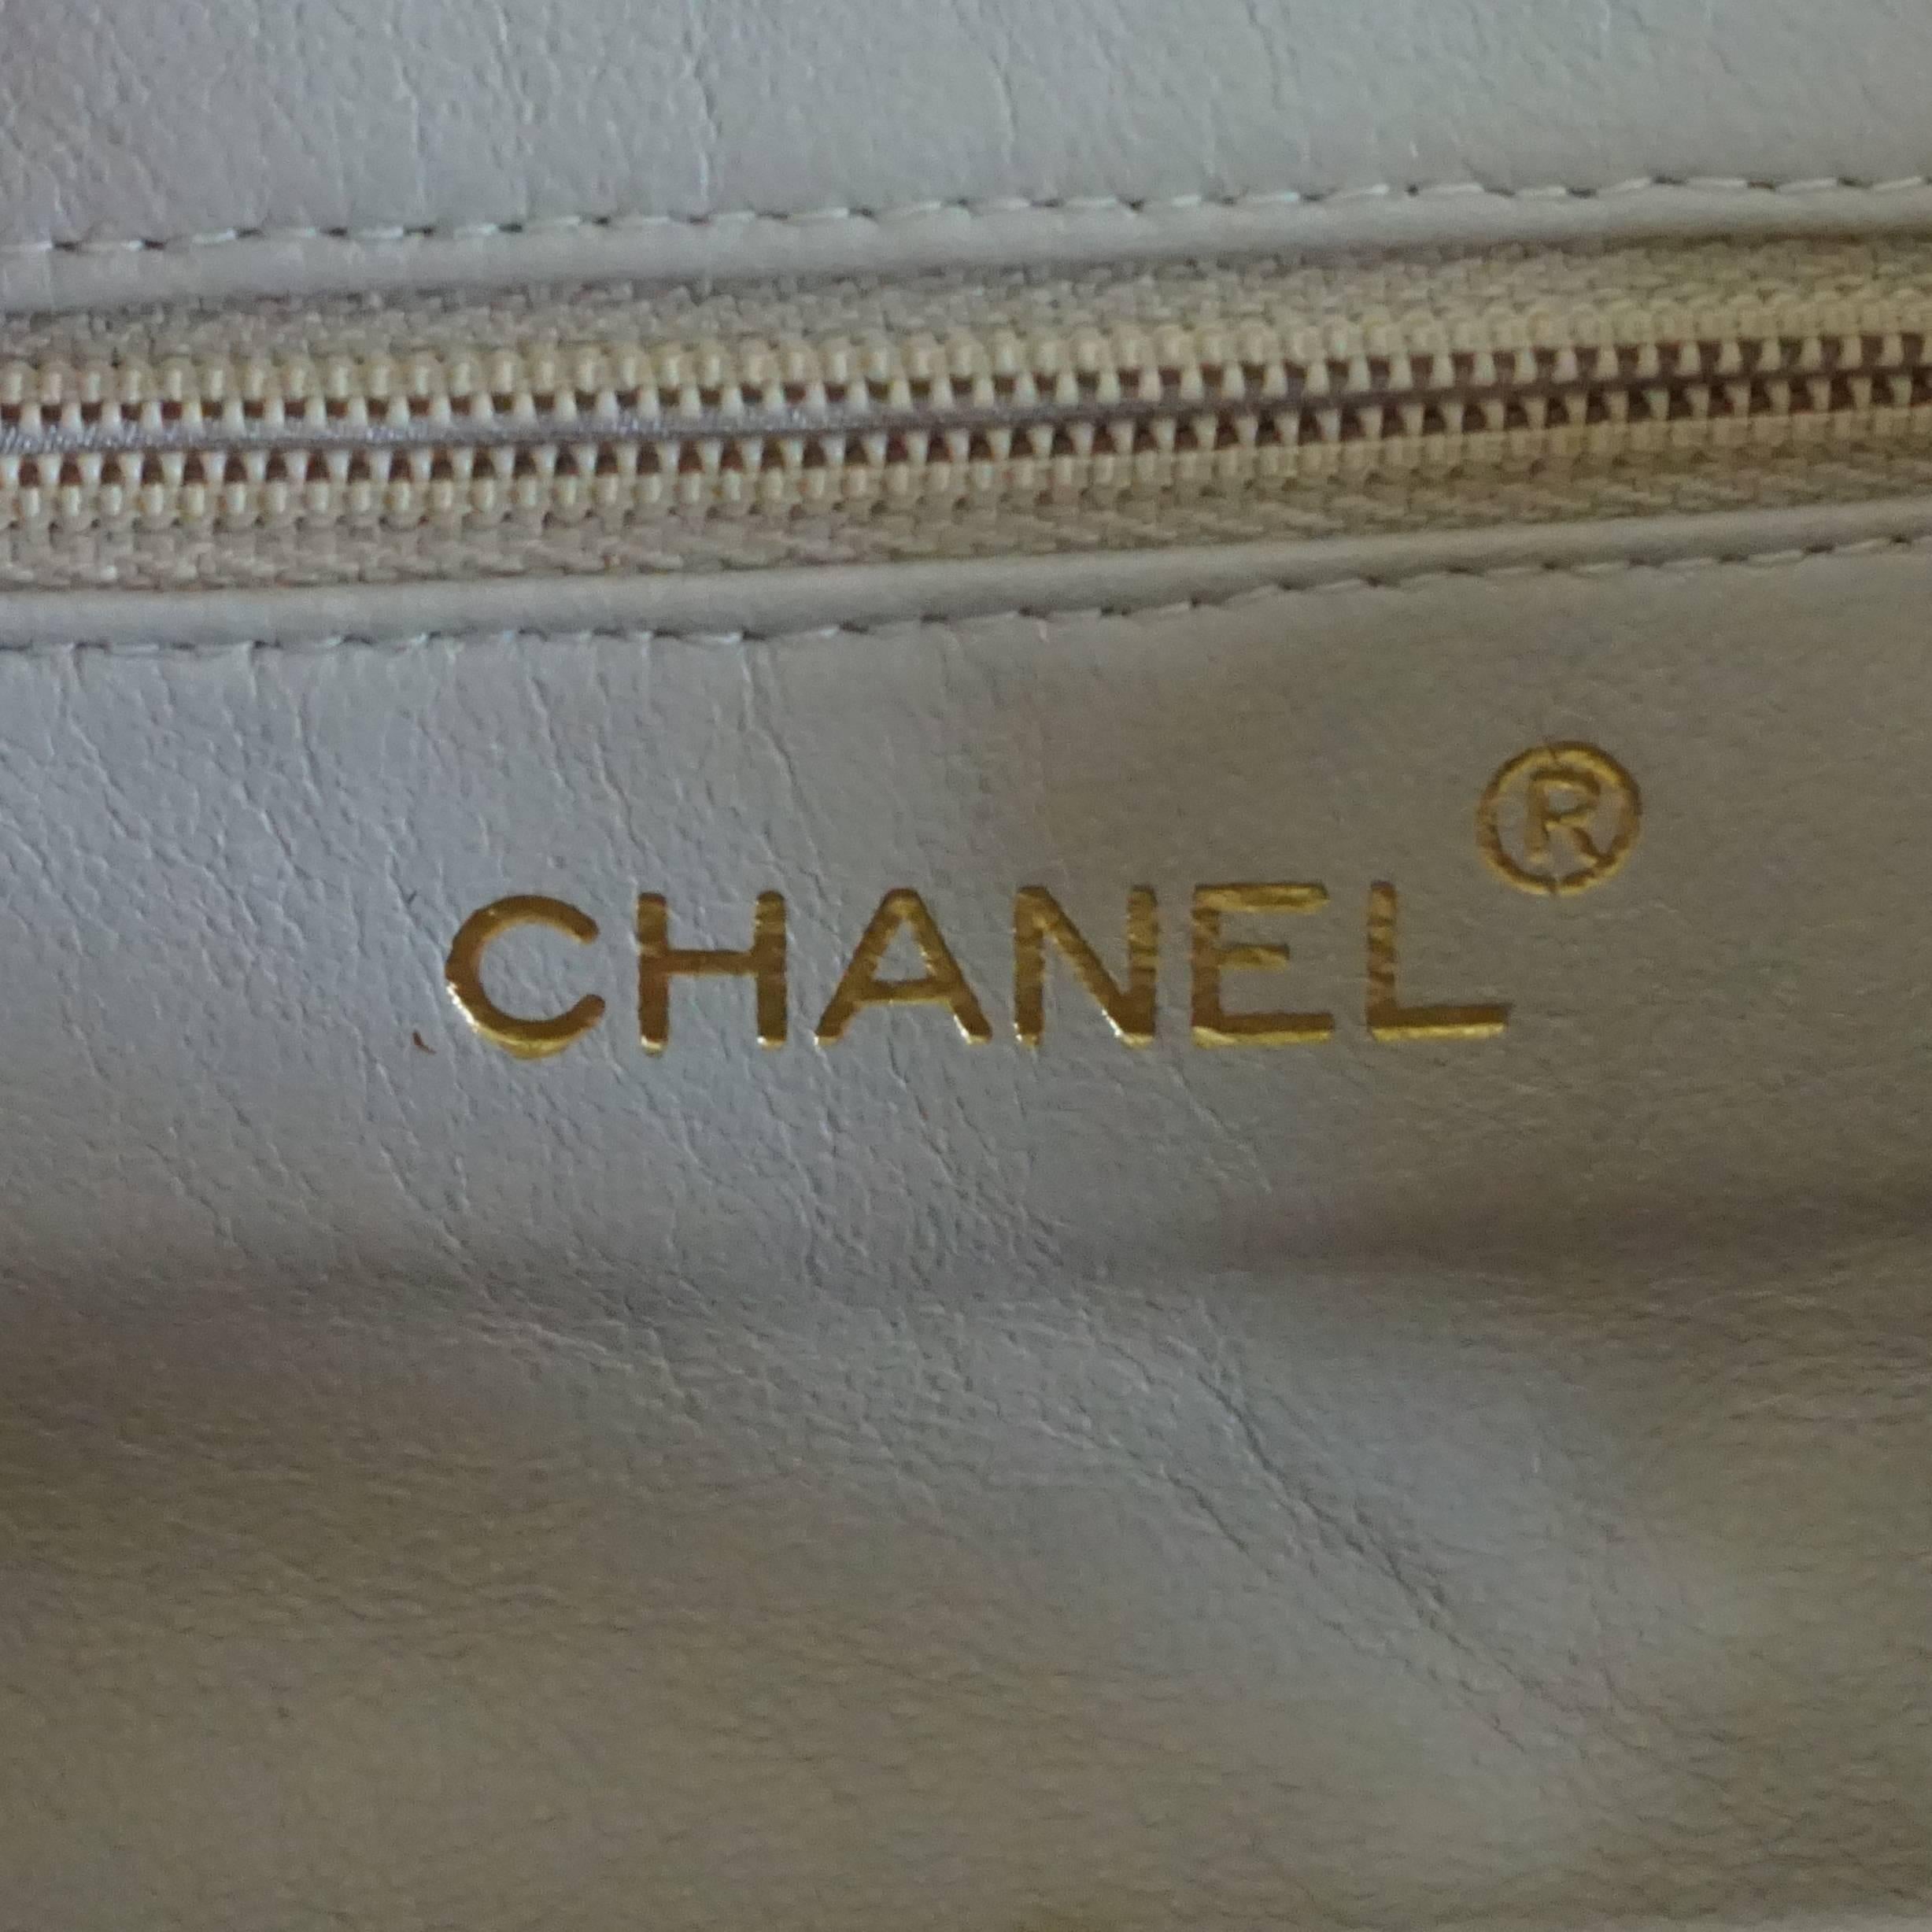 Chanel Pink Leather Frame Crossbody Bag - circa late 80's 1